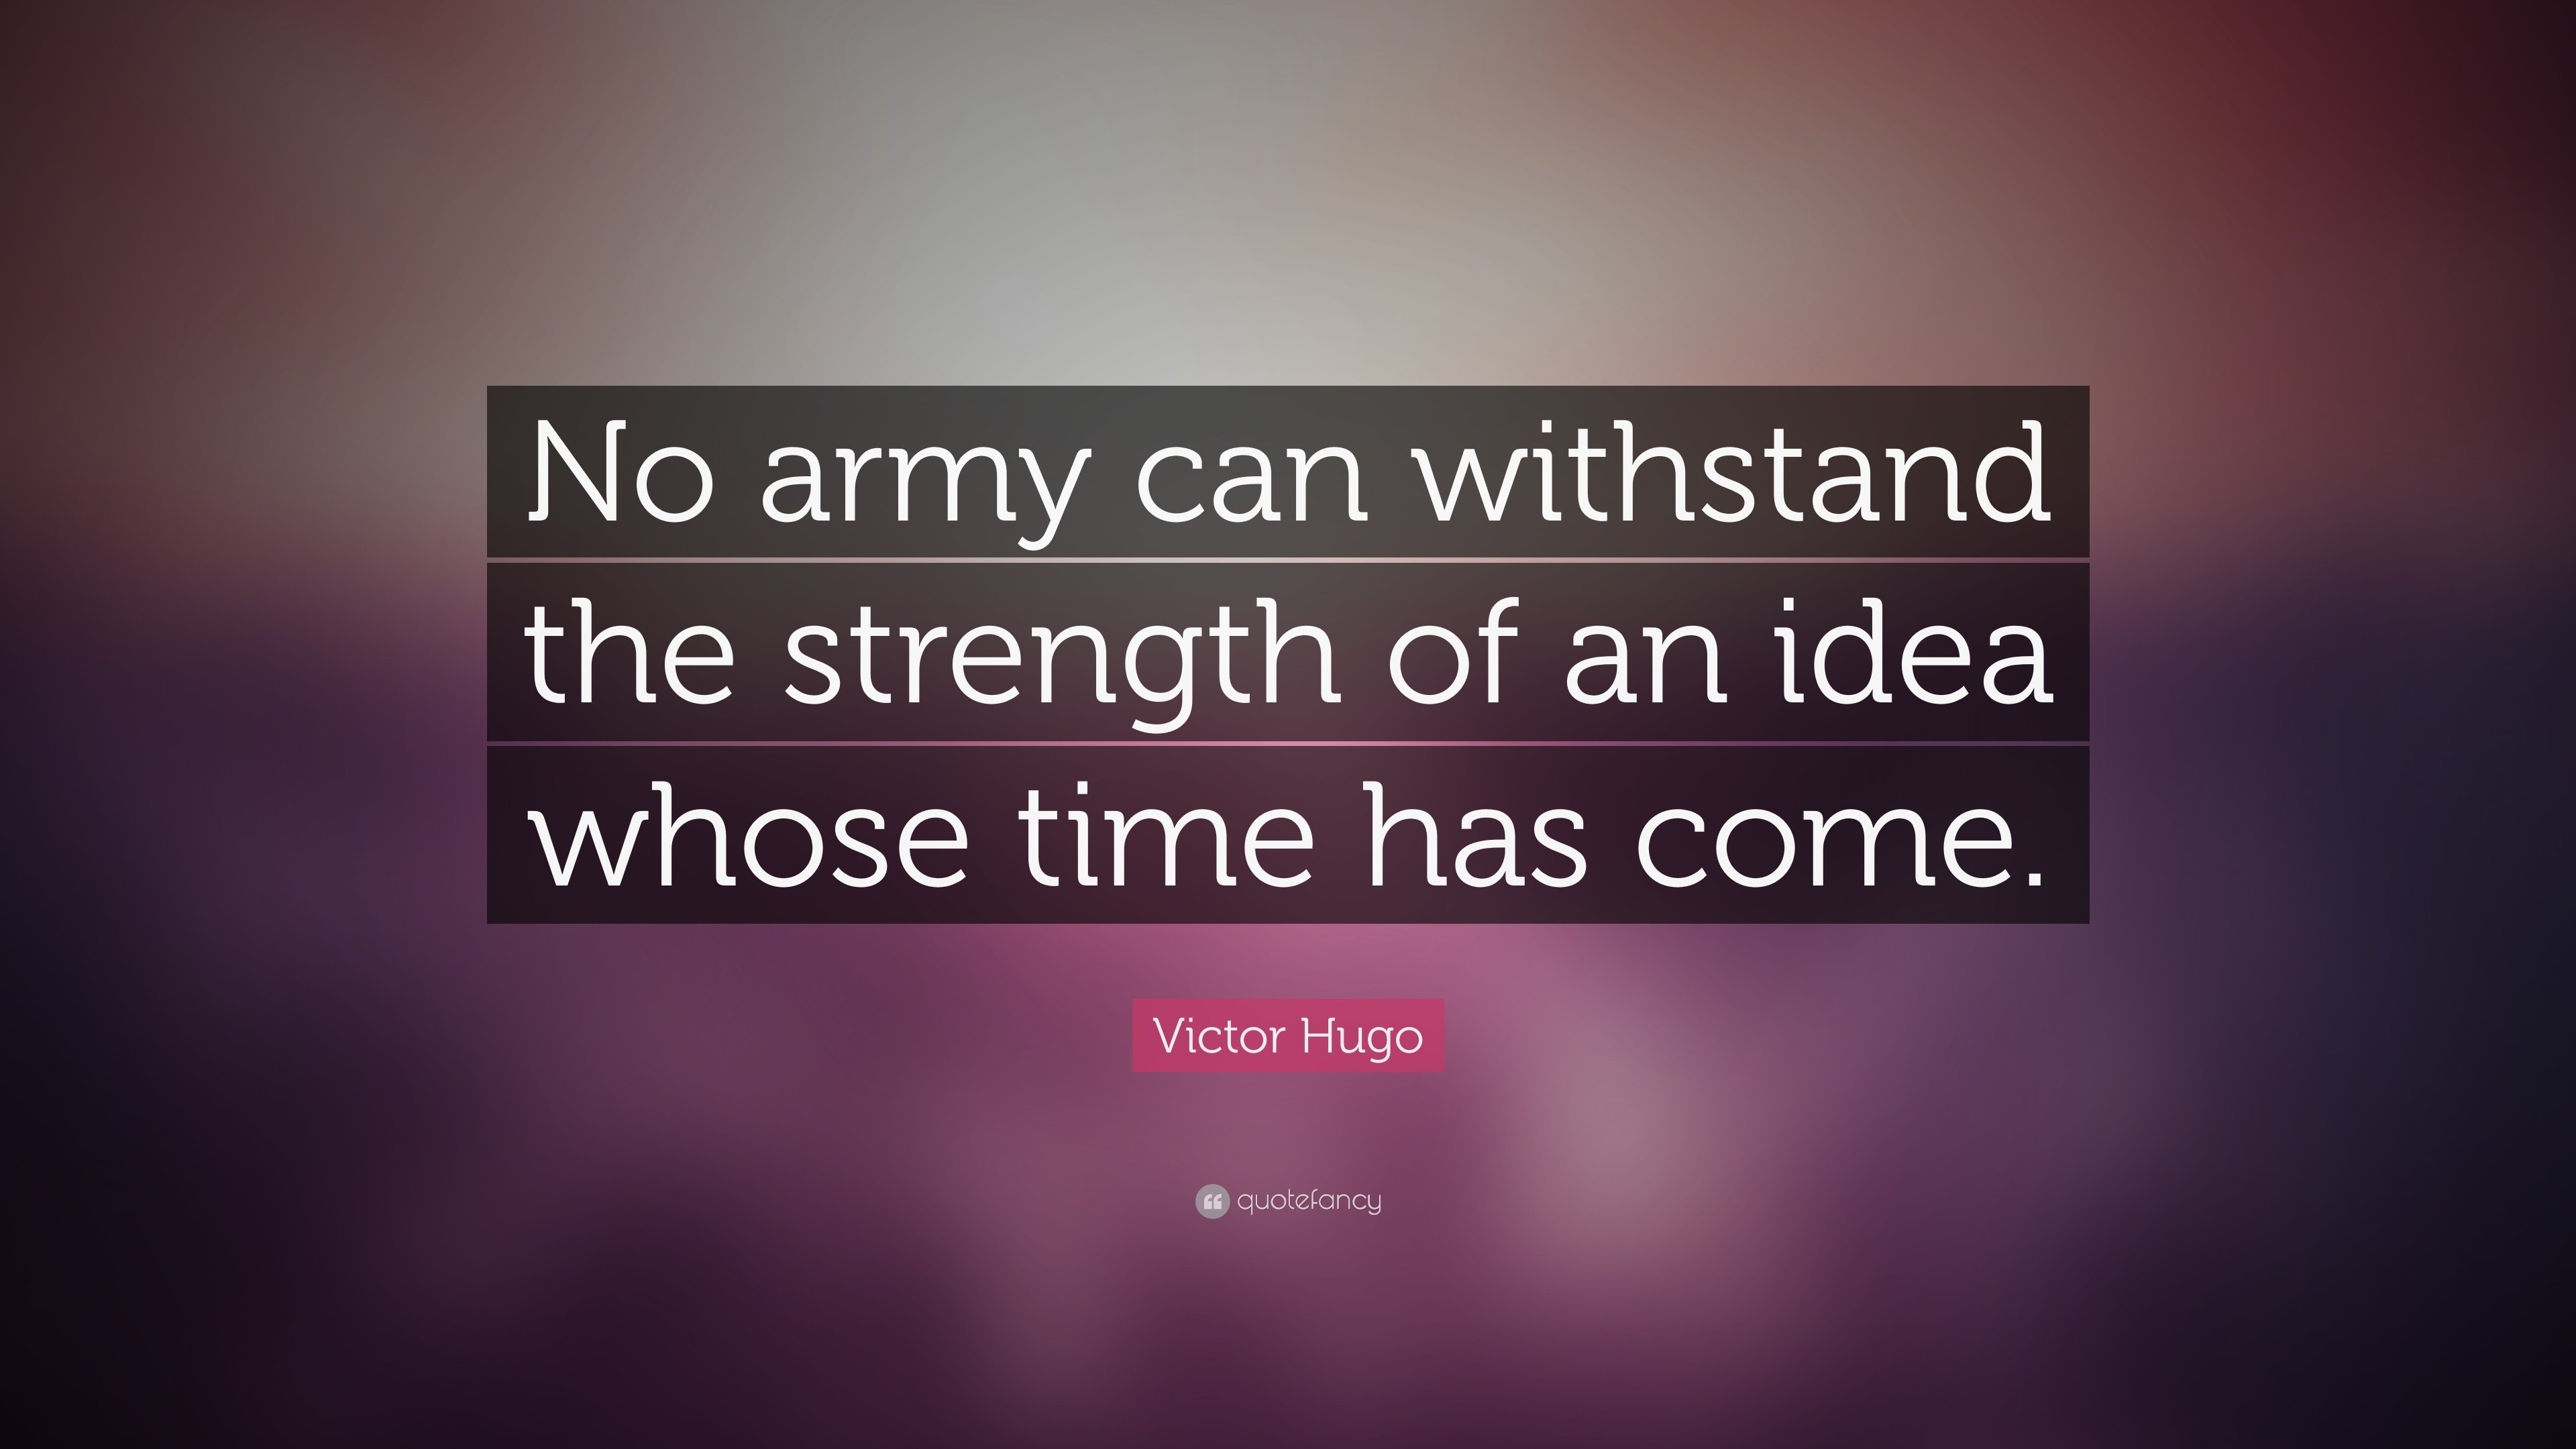 10 Wonderful An Idea Whose Time Has Come victor hugo quote no army can withstand the strength of an idea 3 2022